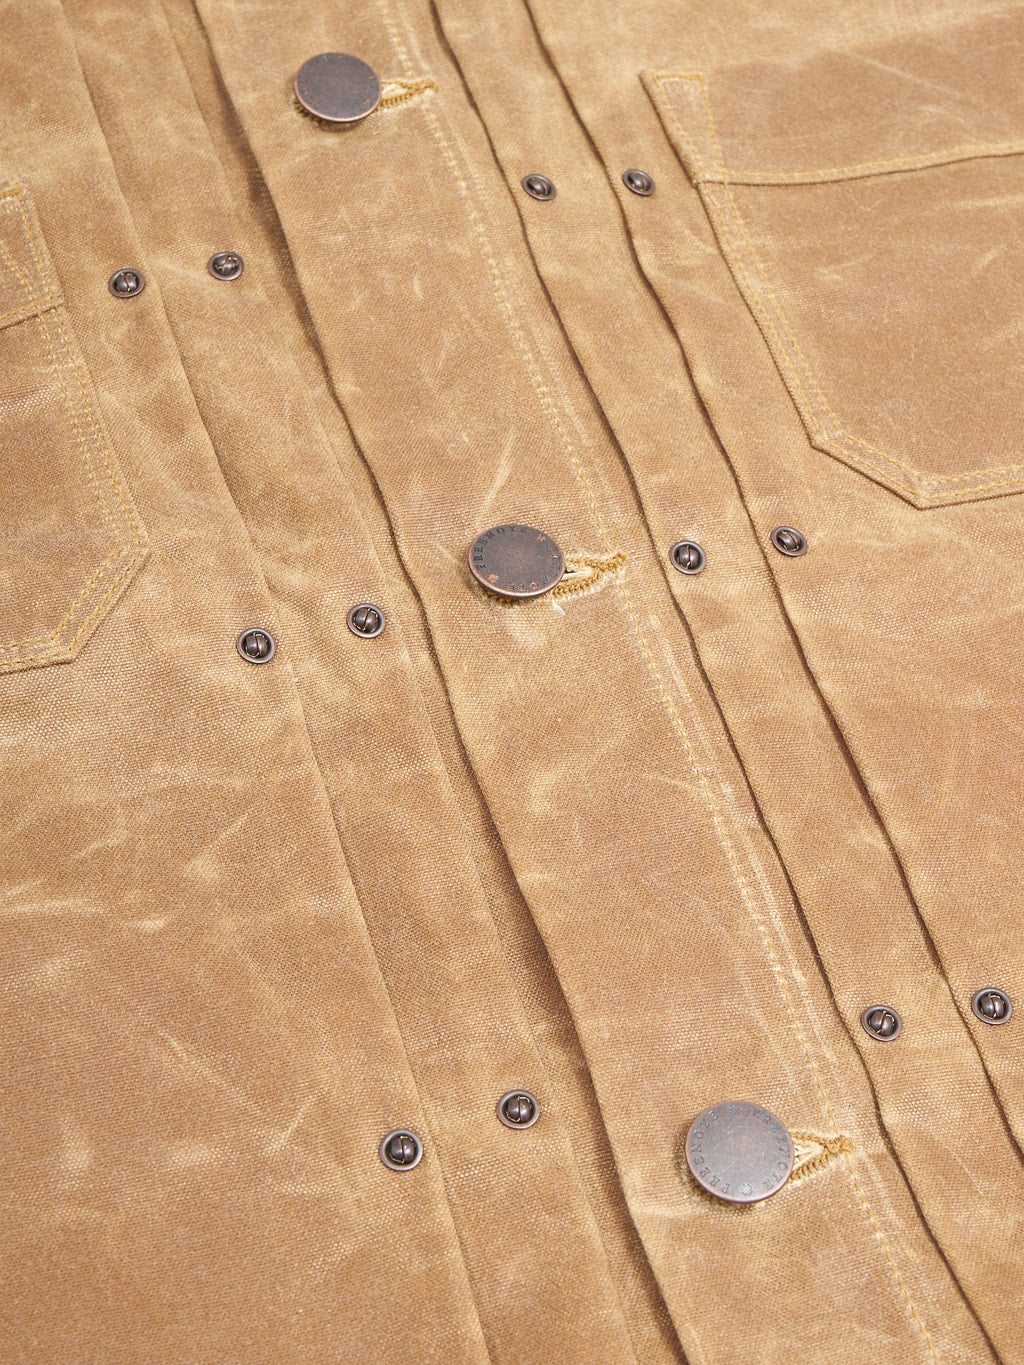 Freenote Cloth Riders Jacket Waxed Canvas Rust buttons